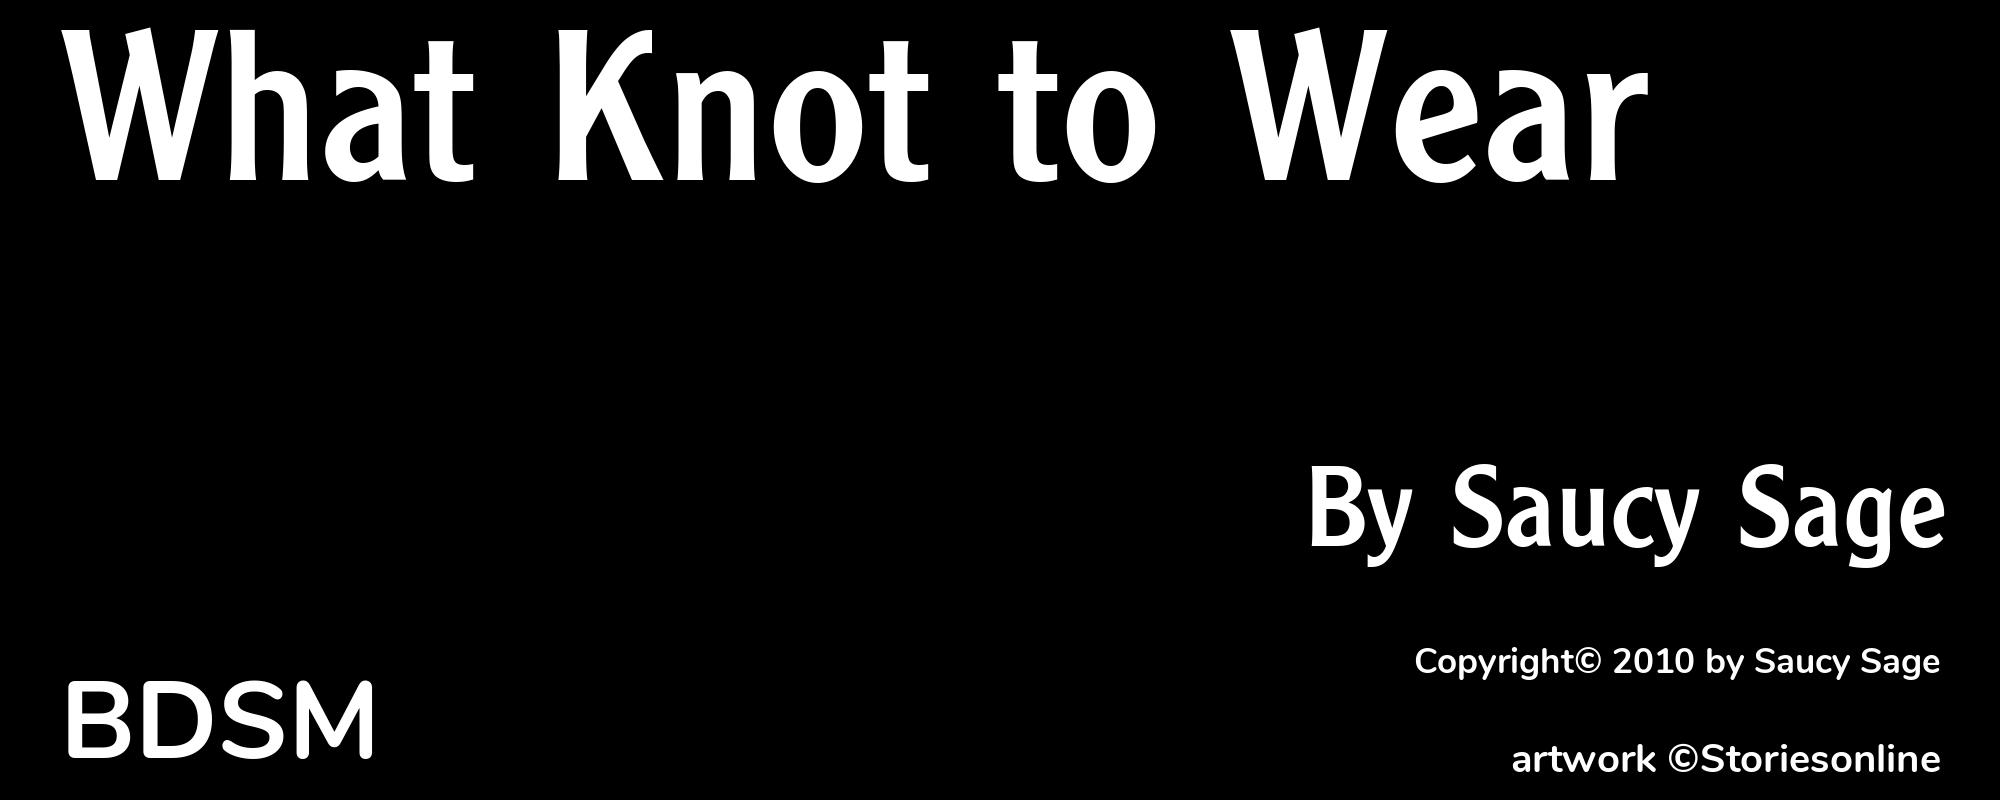 What Knot to Wear - Cover